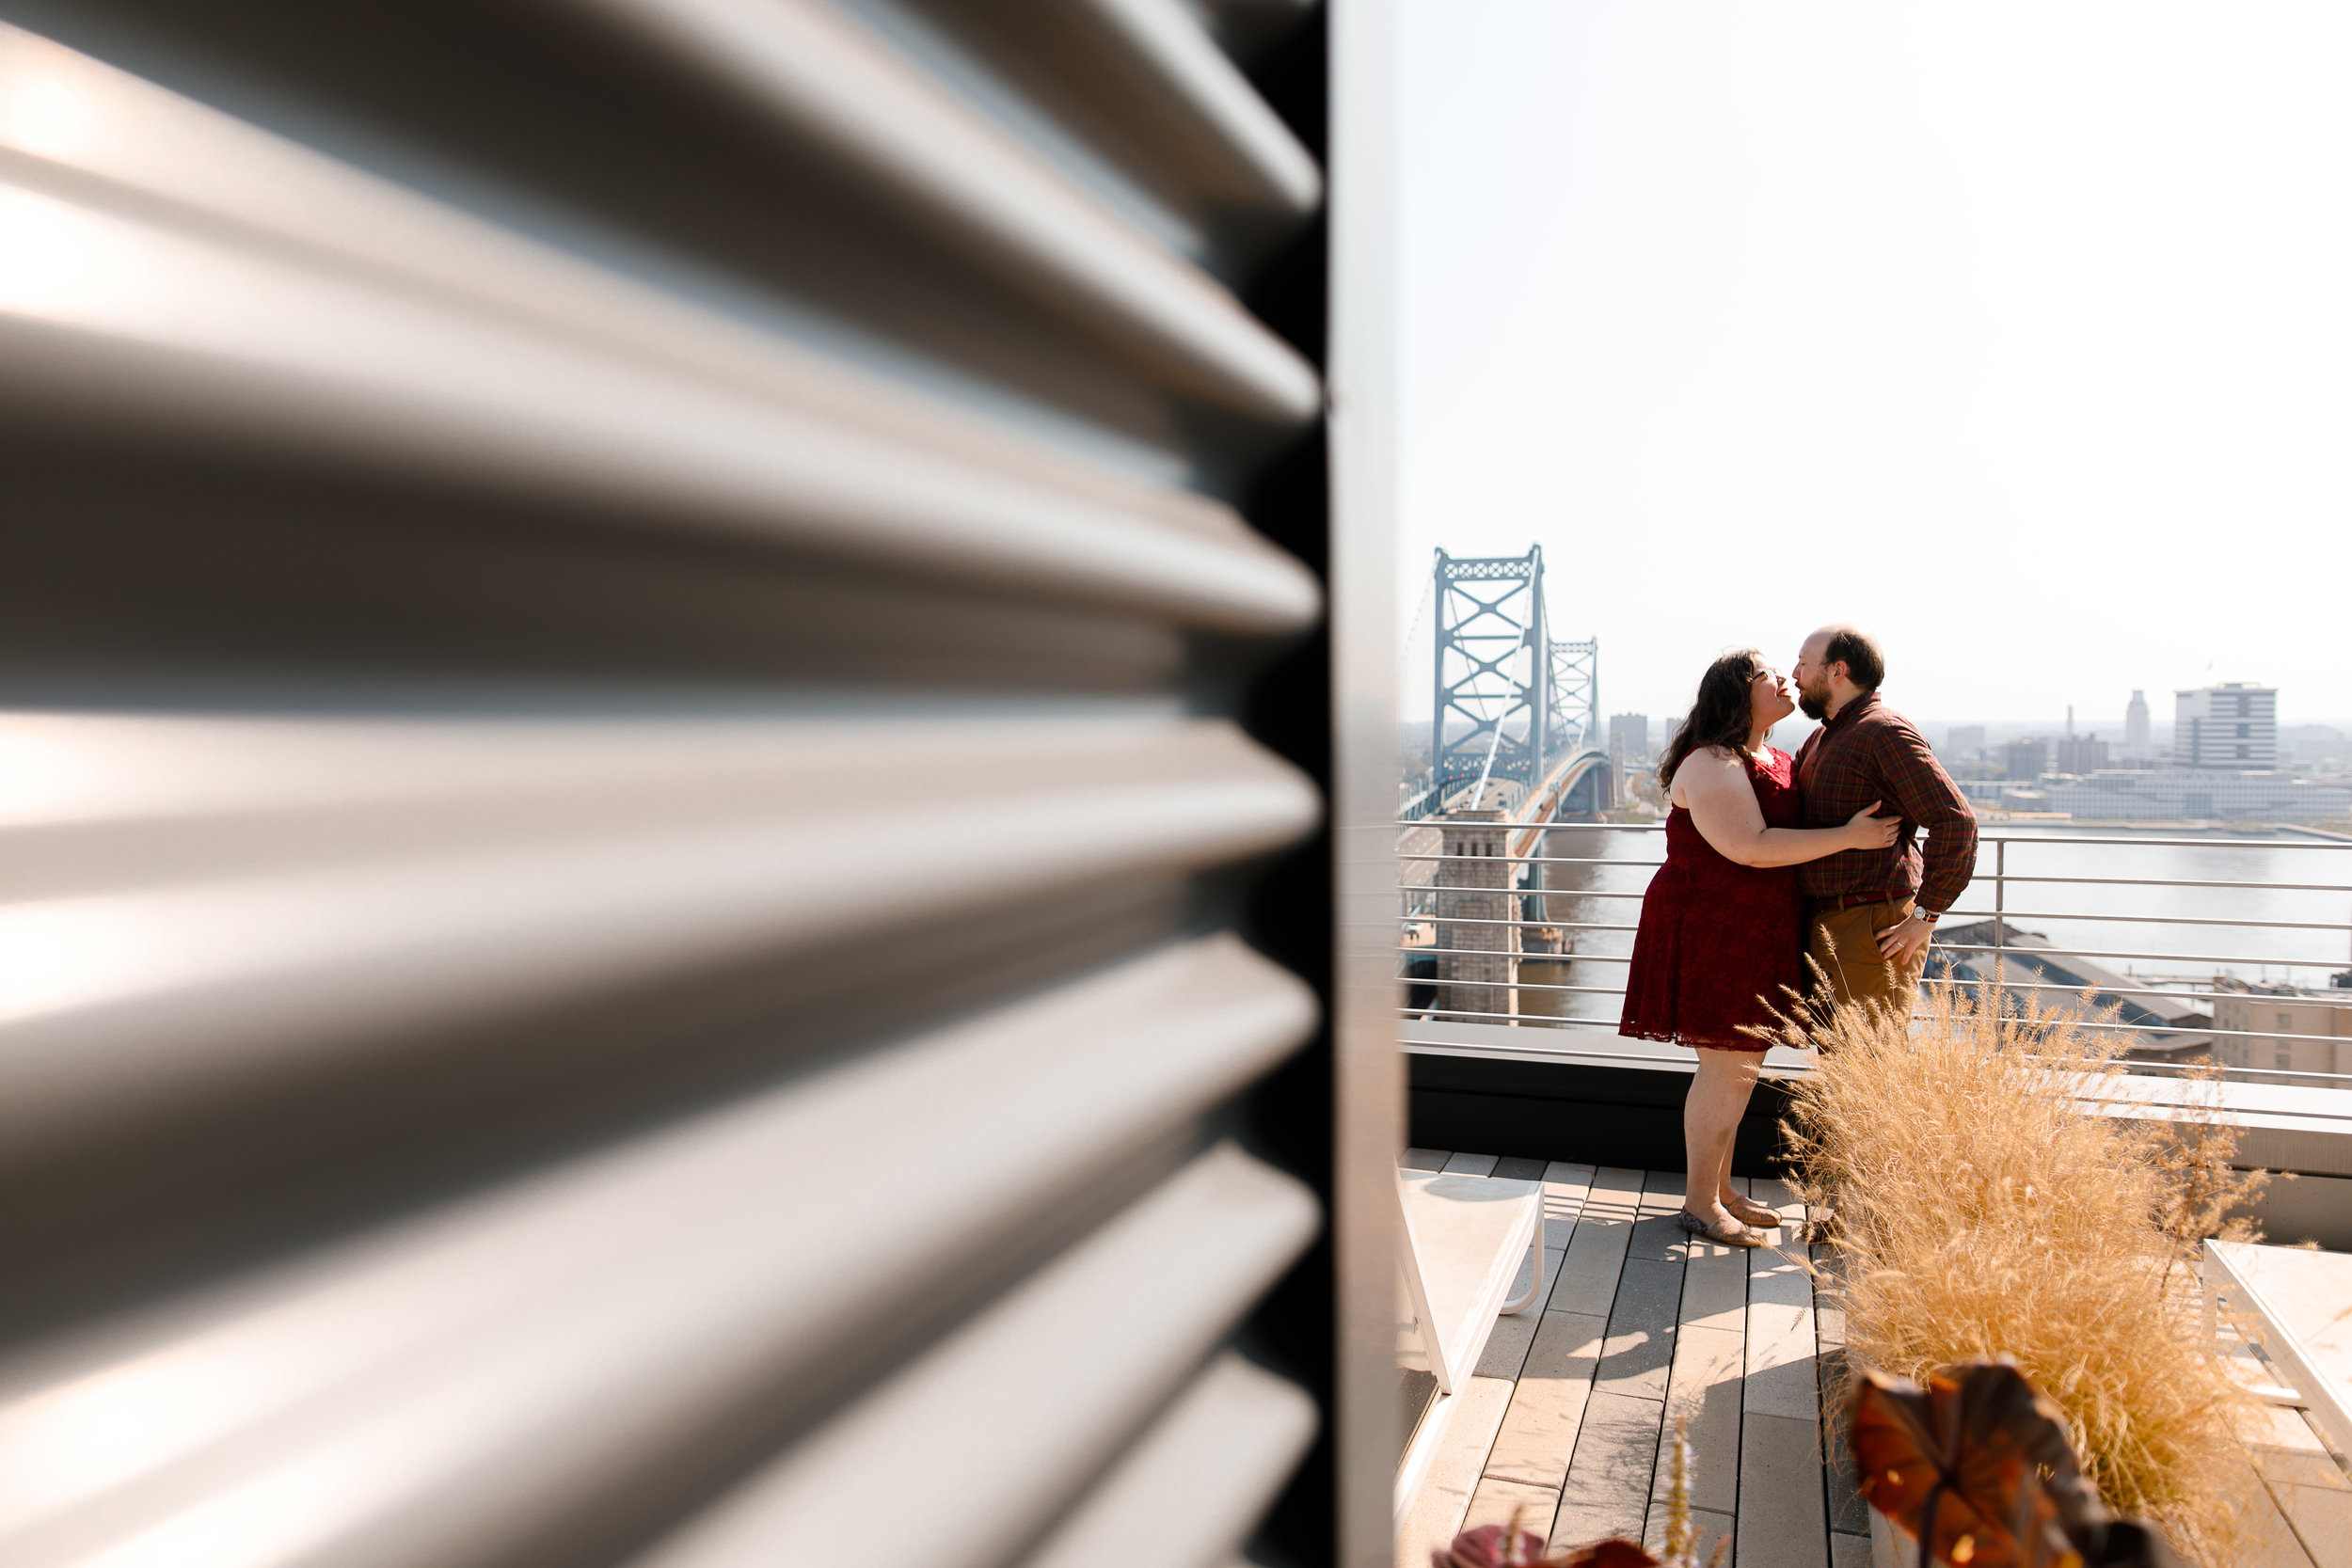 D&A Old City Philly Couples Session Photo Location Ideas 35.jpg